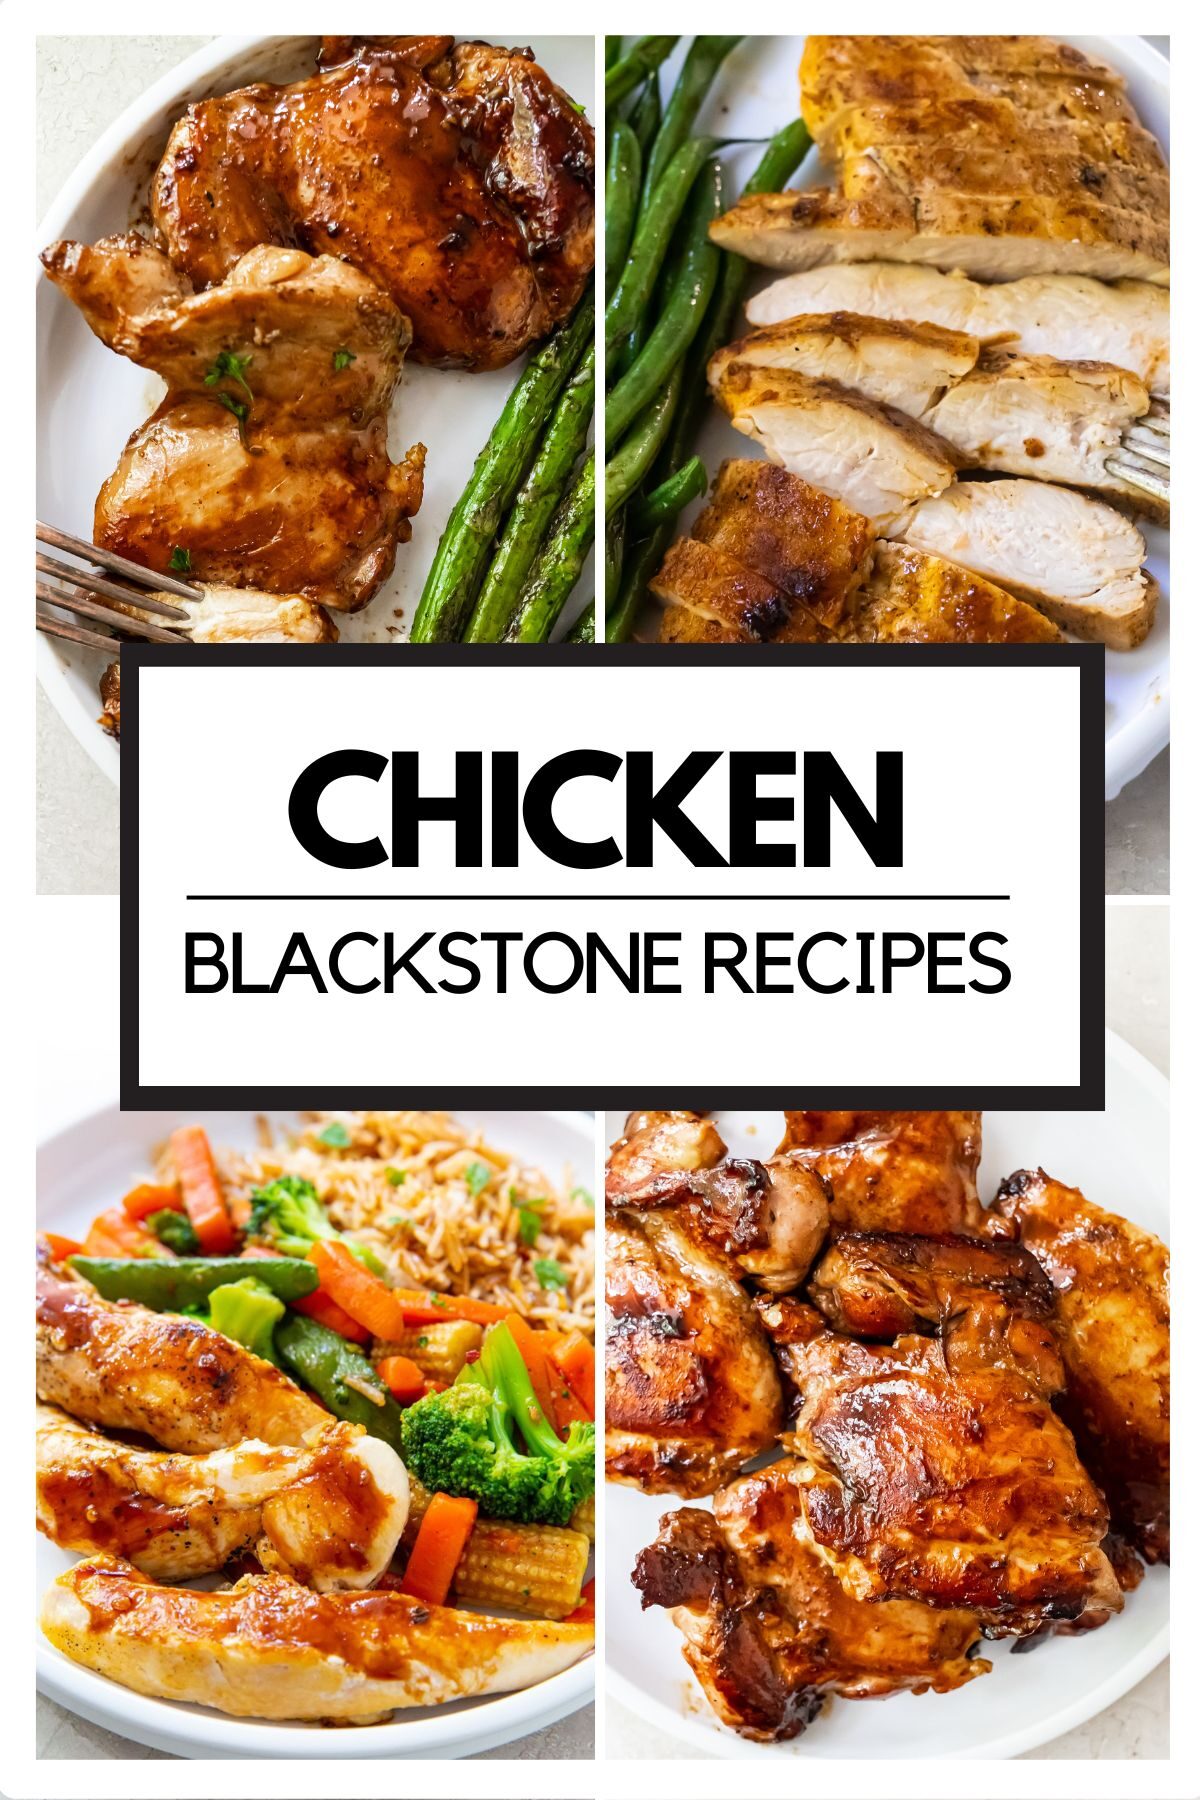 PINTEREST IMAGE FOR THE BEST BLACKSTONE CHICKEN RECIPES - A COLLAGE OF 4 CHICKEN RECIPES